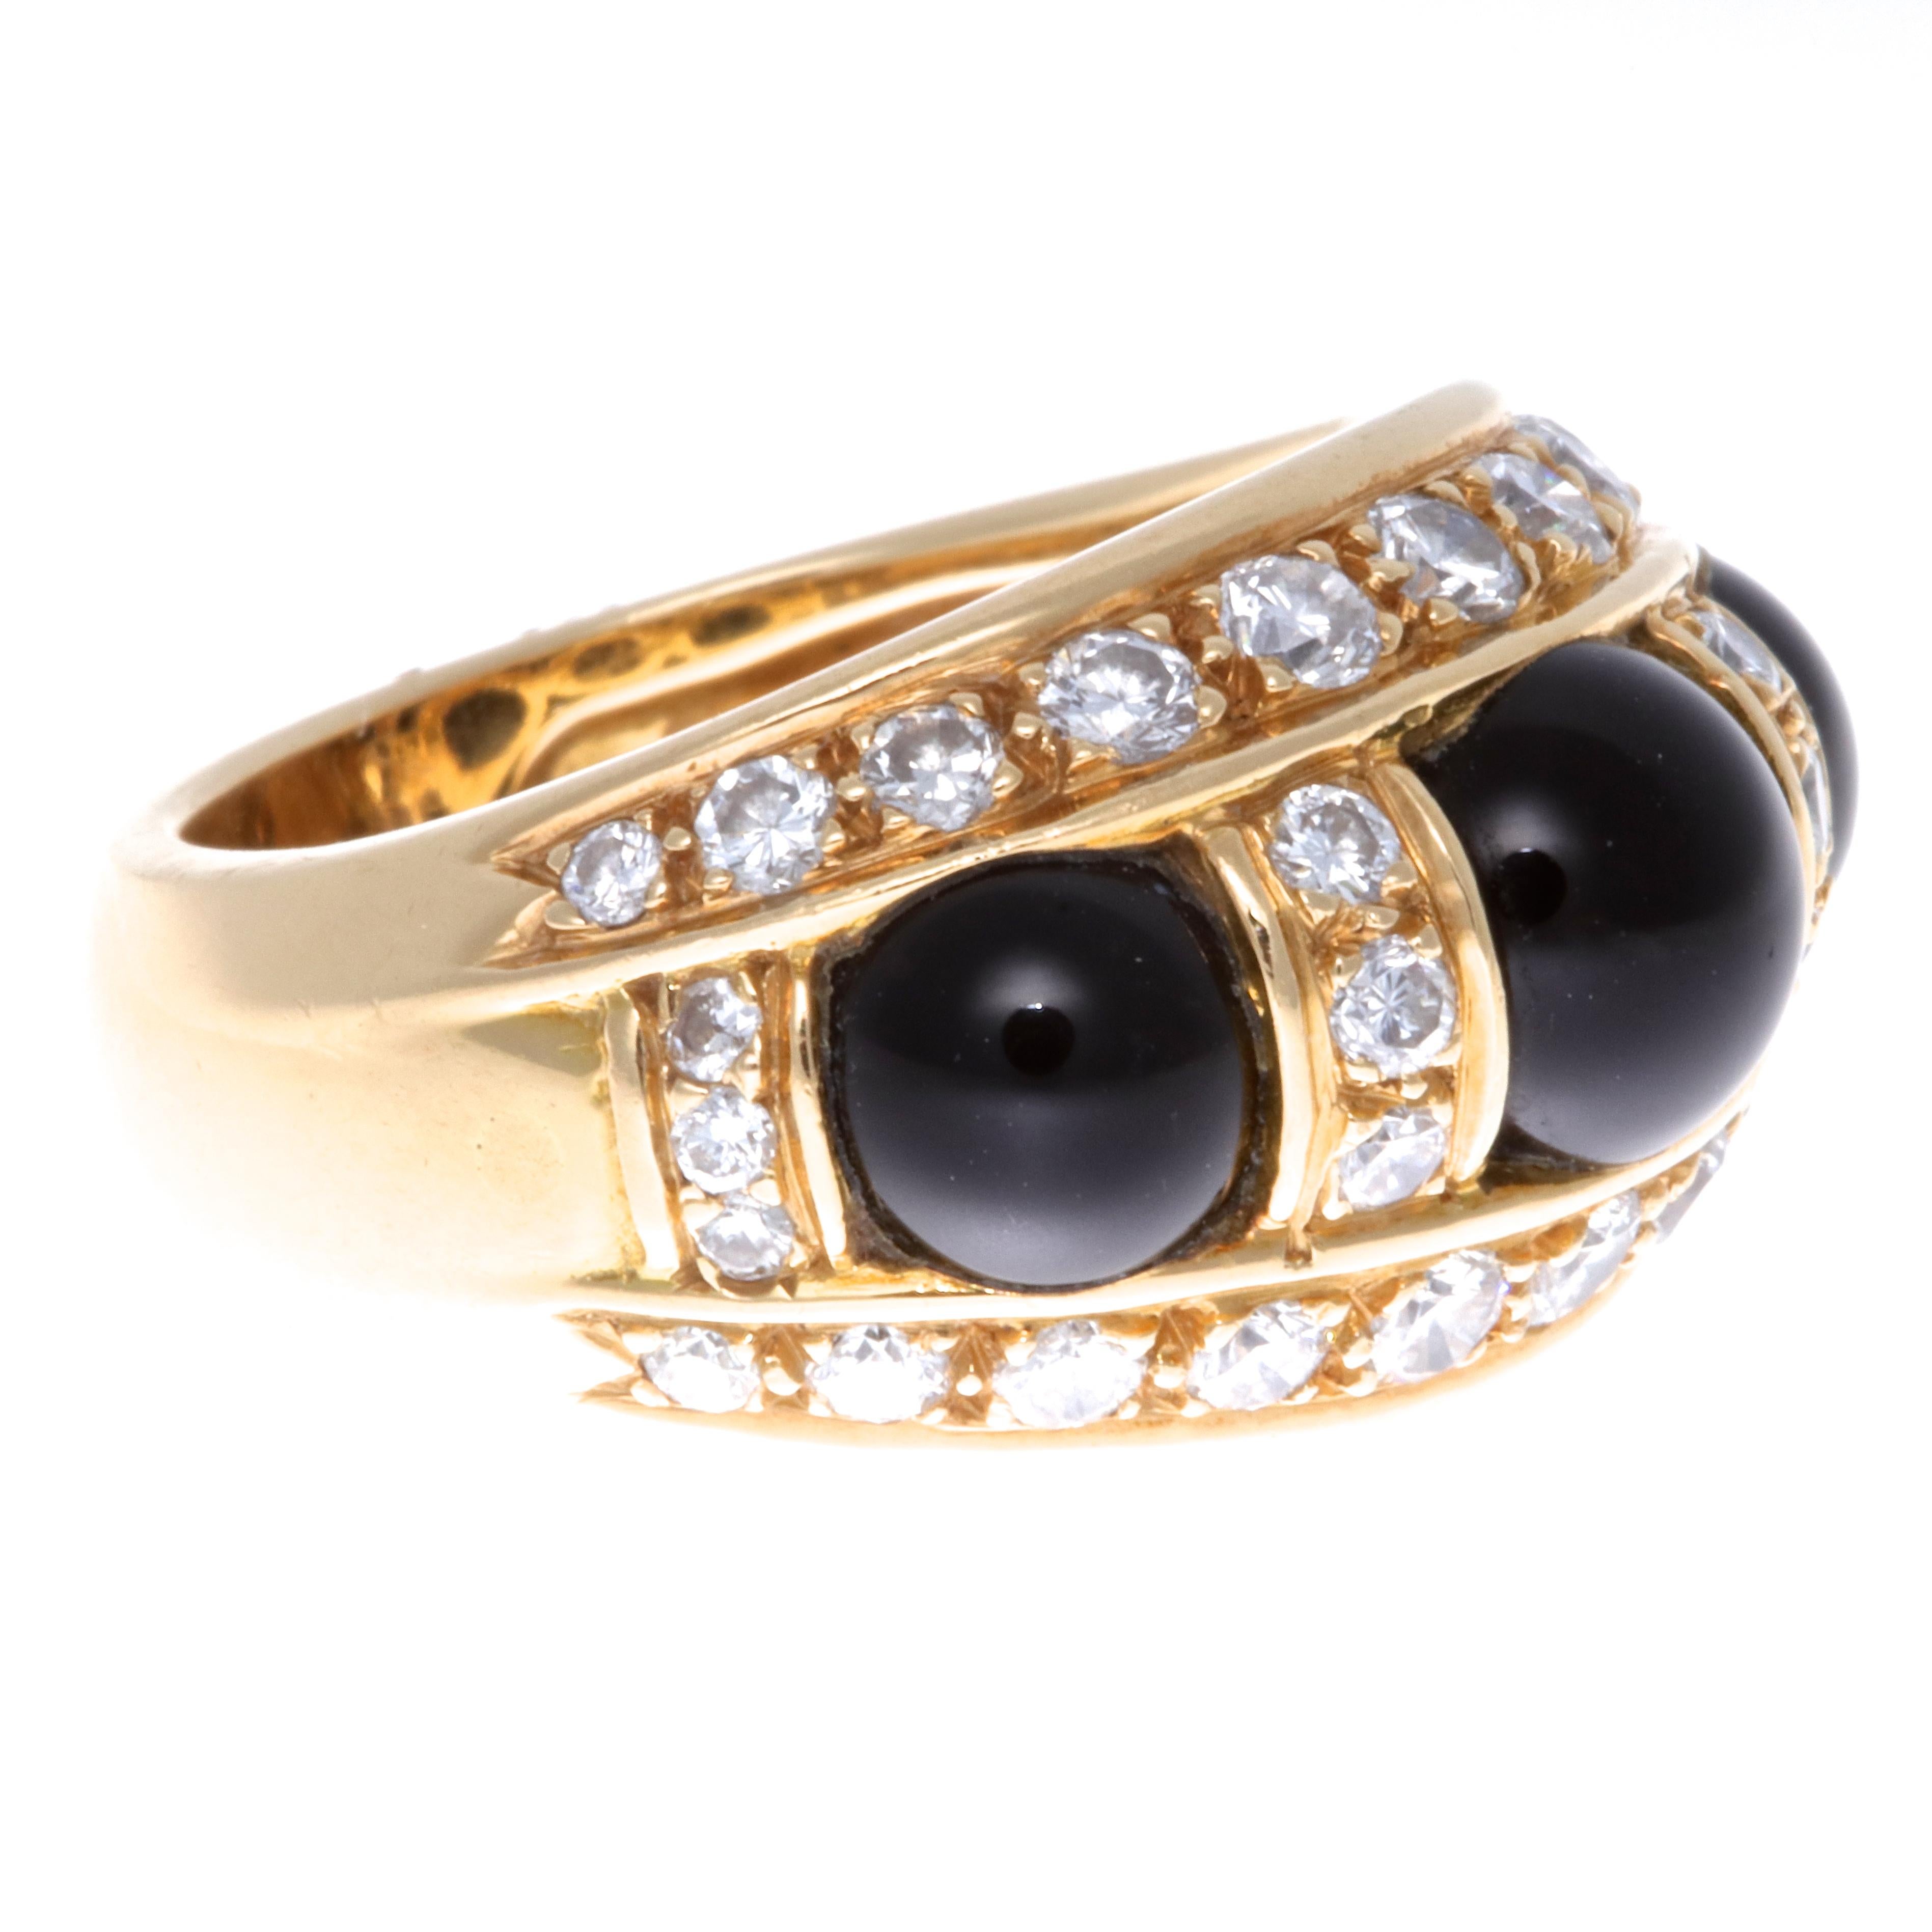 Gold, black and diamonds is the ultimate combo. Especially when it's signed, vintage Piaget. Wear it with an all-black outfit to complete the look or with any other color to make a statement. The ring features 18k gold, onyx and 34 round brilliant